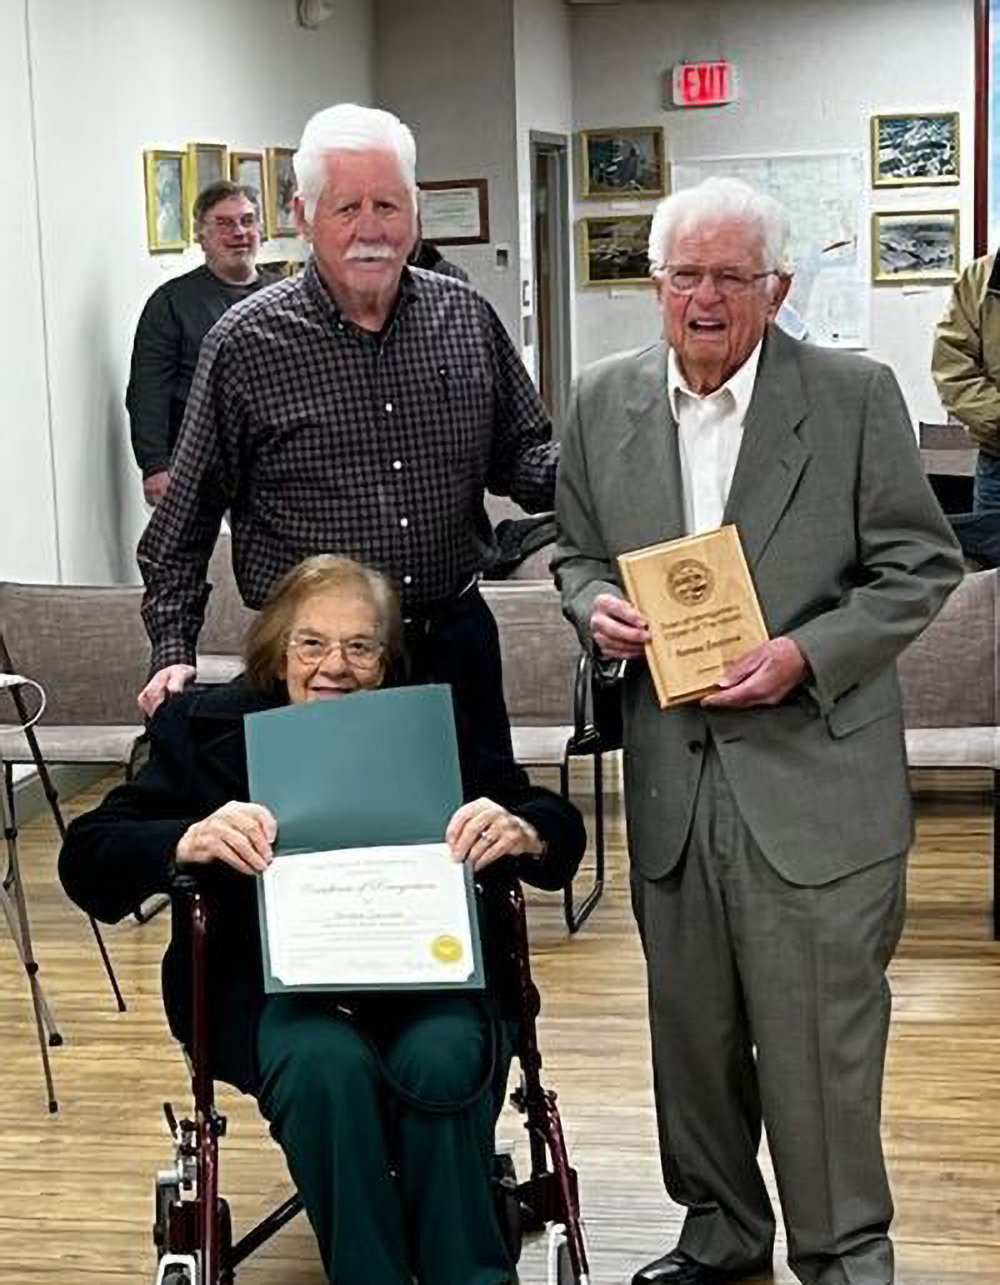 Romeo Zaccone (far right) was honored last week as the Town of Montgomery Citizen of the Month. He is shown with Ann, his wife of 75 years, and Town of Montgomery Supervisor Ron Feller